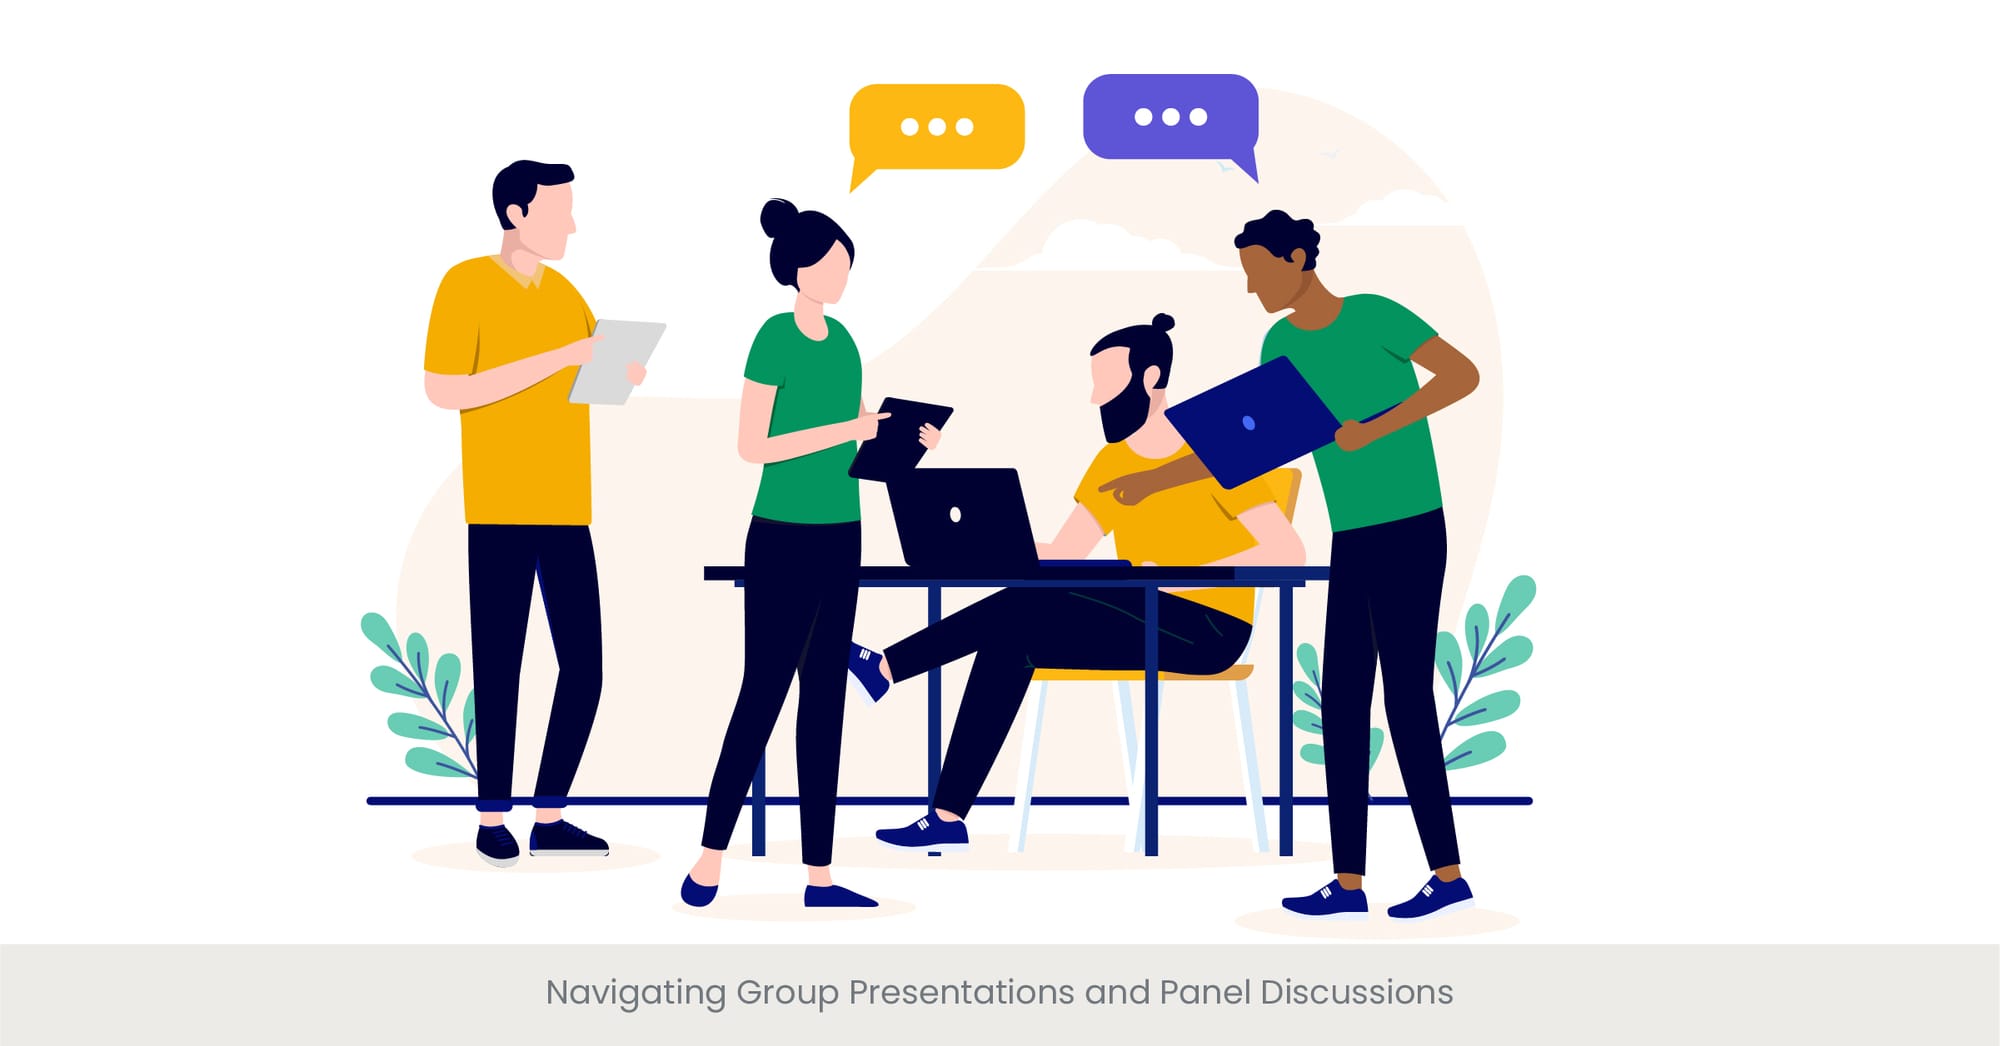 Navigating Group Presentations and Panel Discussions